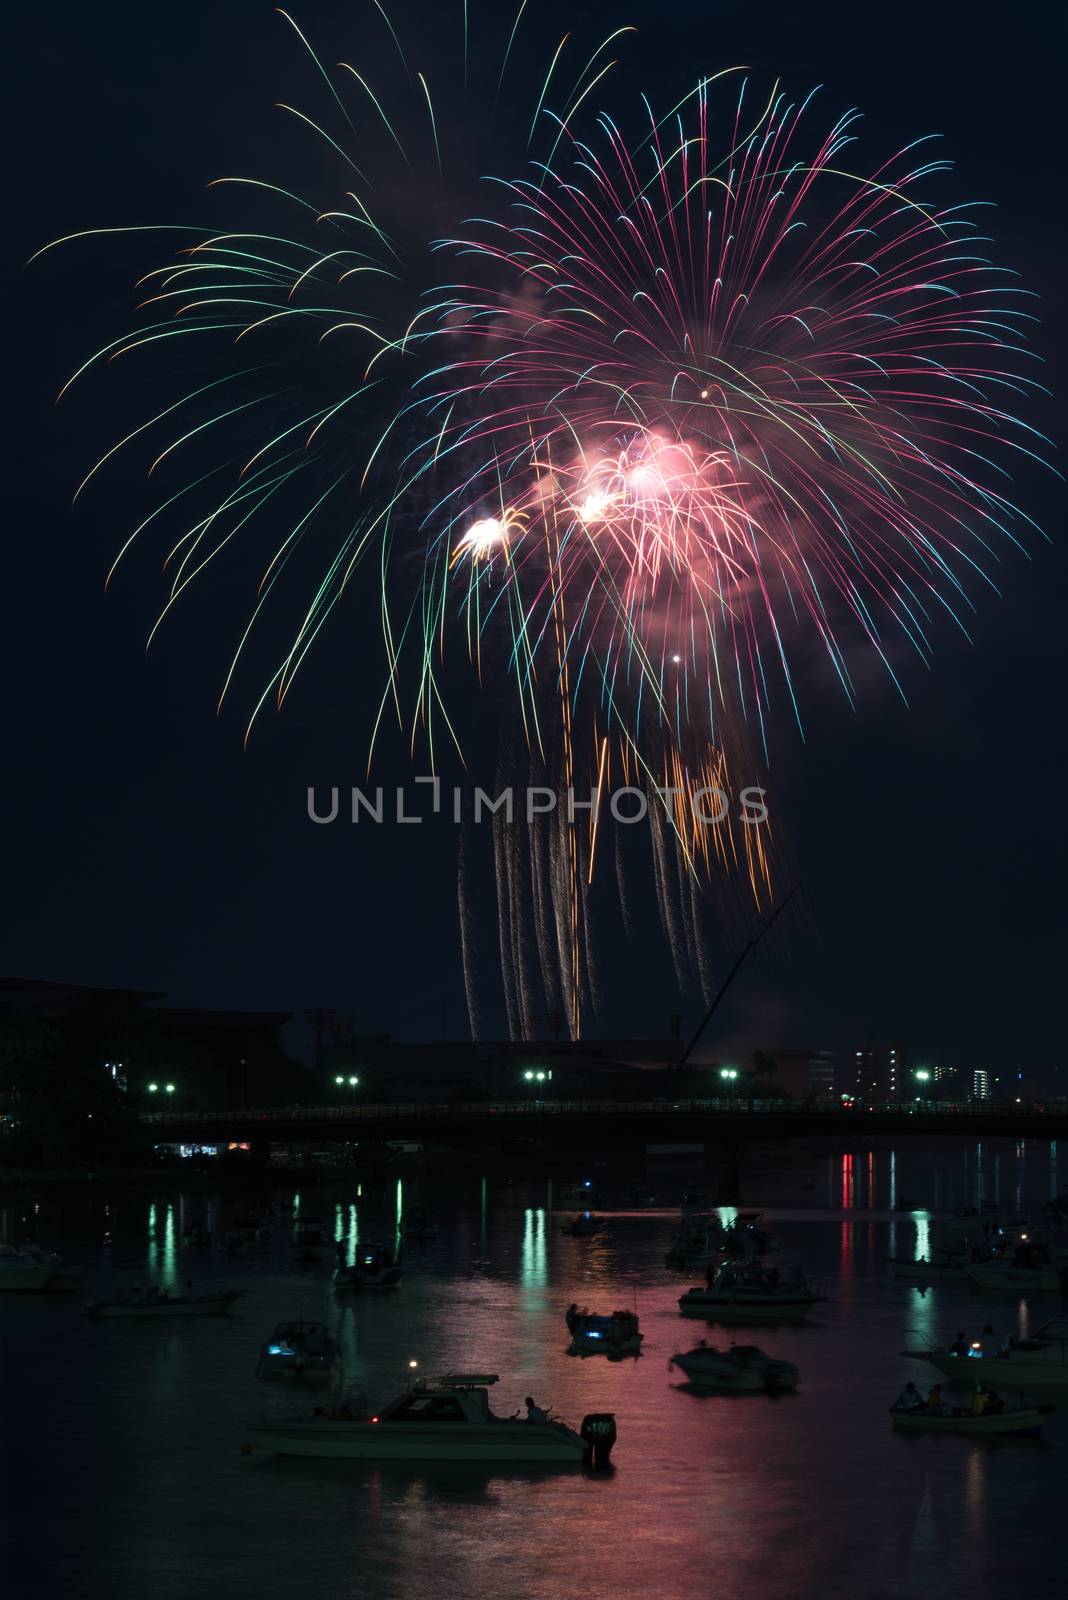 Colorful fireworks reflected in a river with many small boats and a cityscape along the side in the countryside of Kochi, Japan.